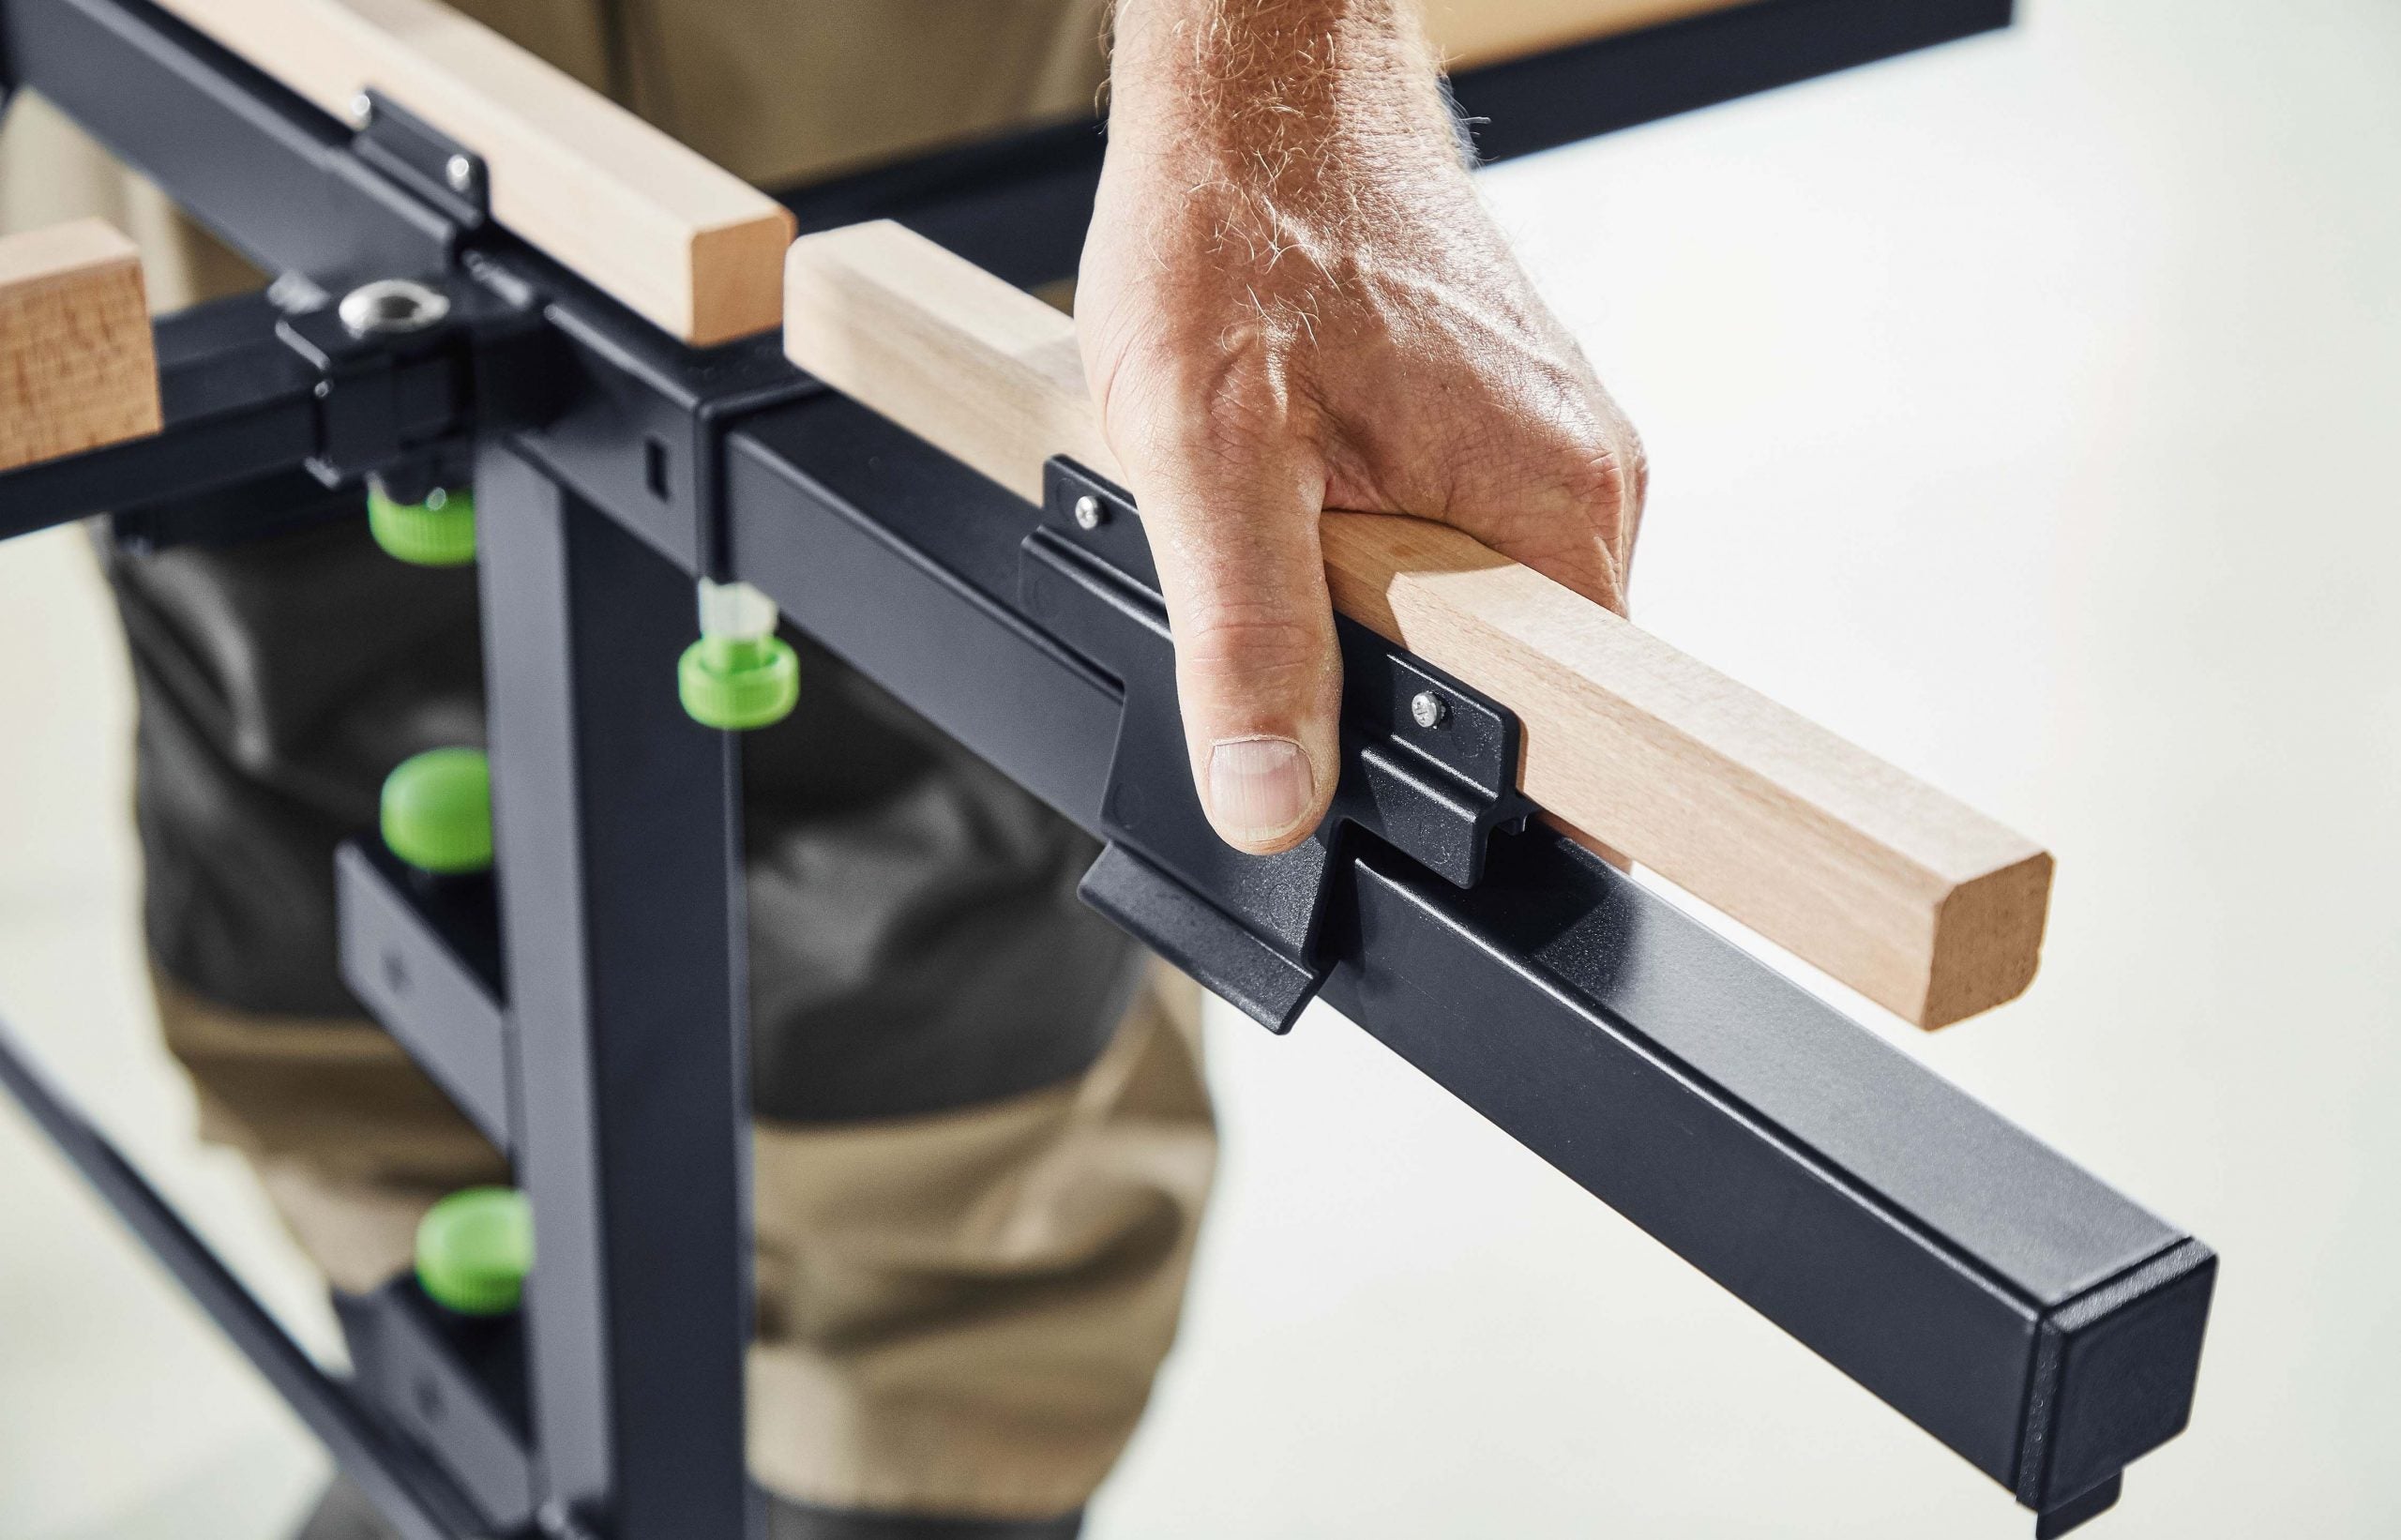 Mobile Sawing & Work Table STM1800 205183 by Festool